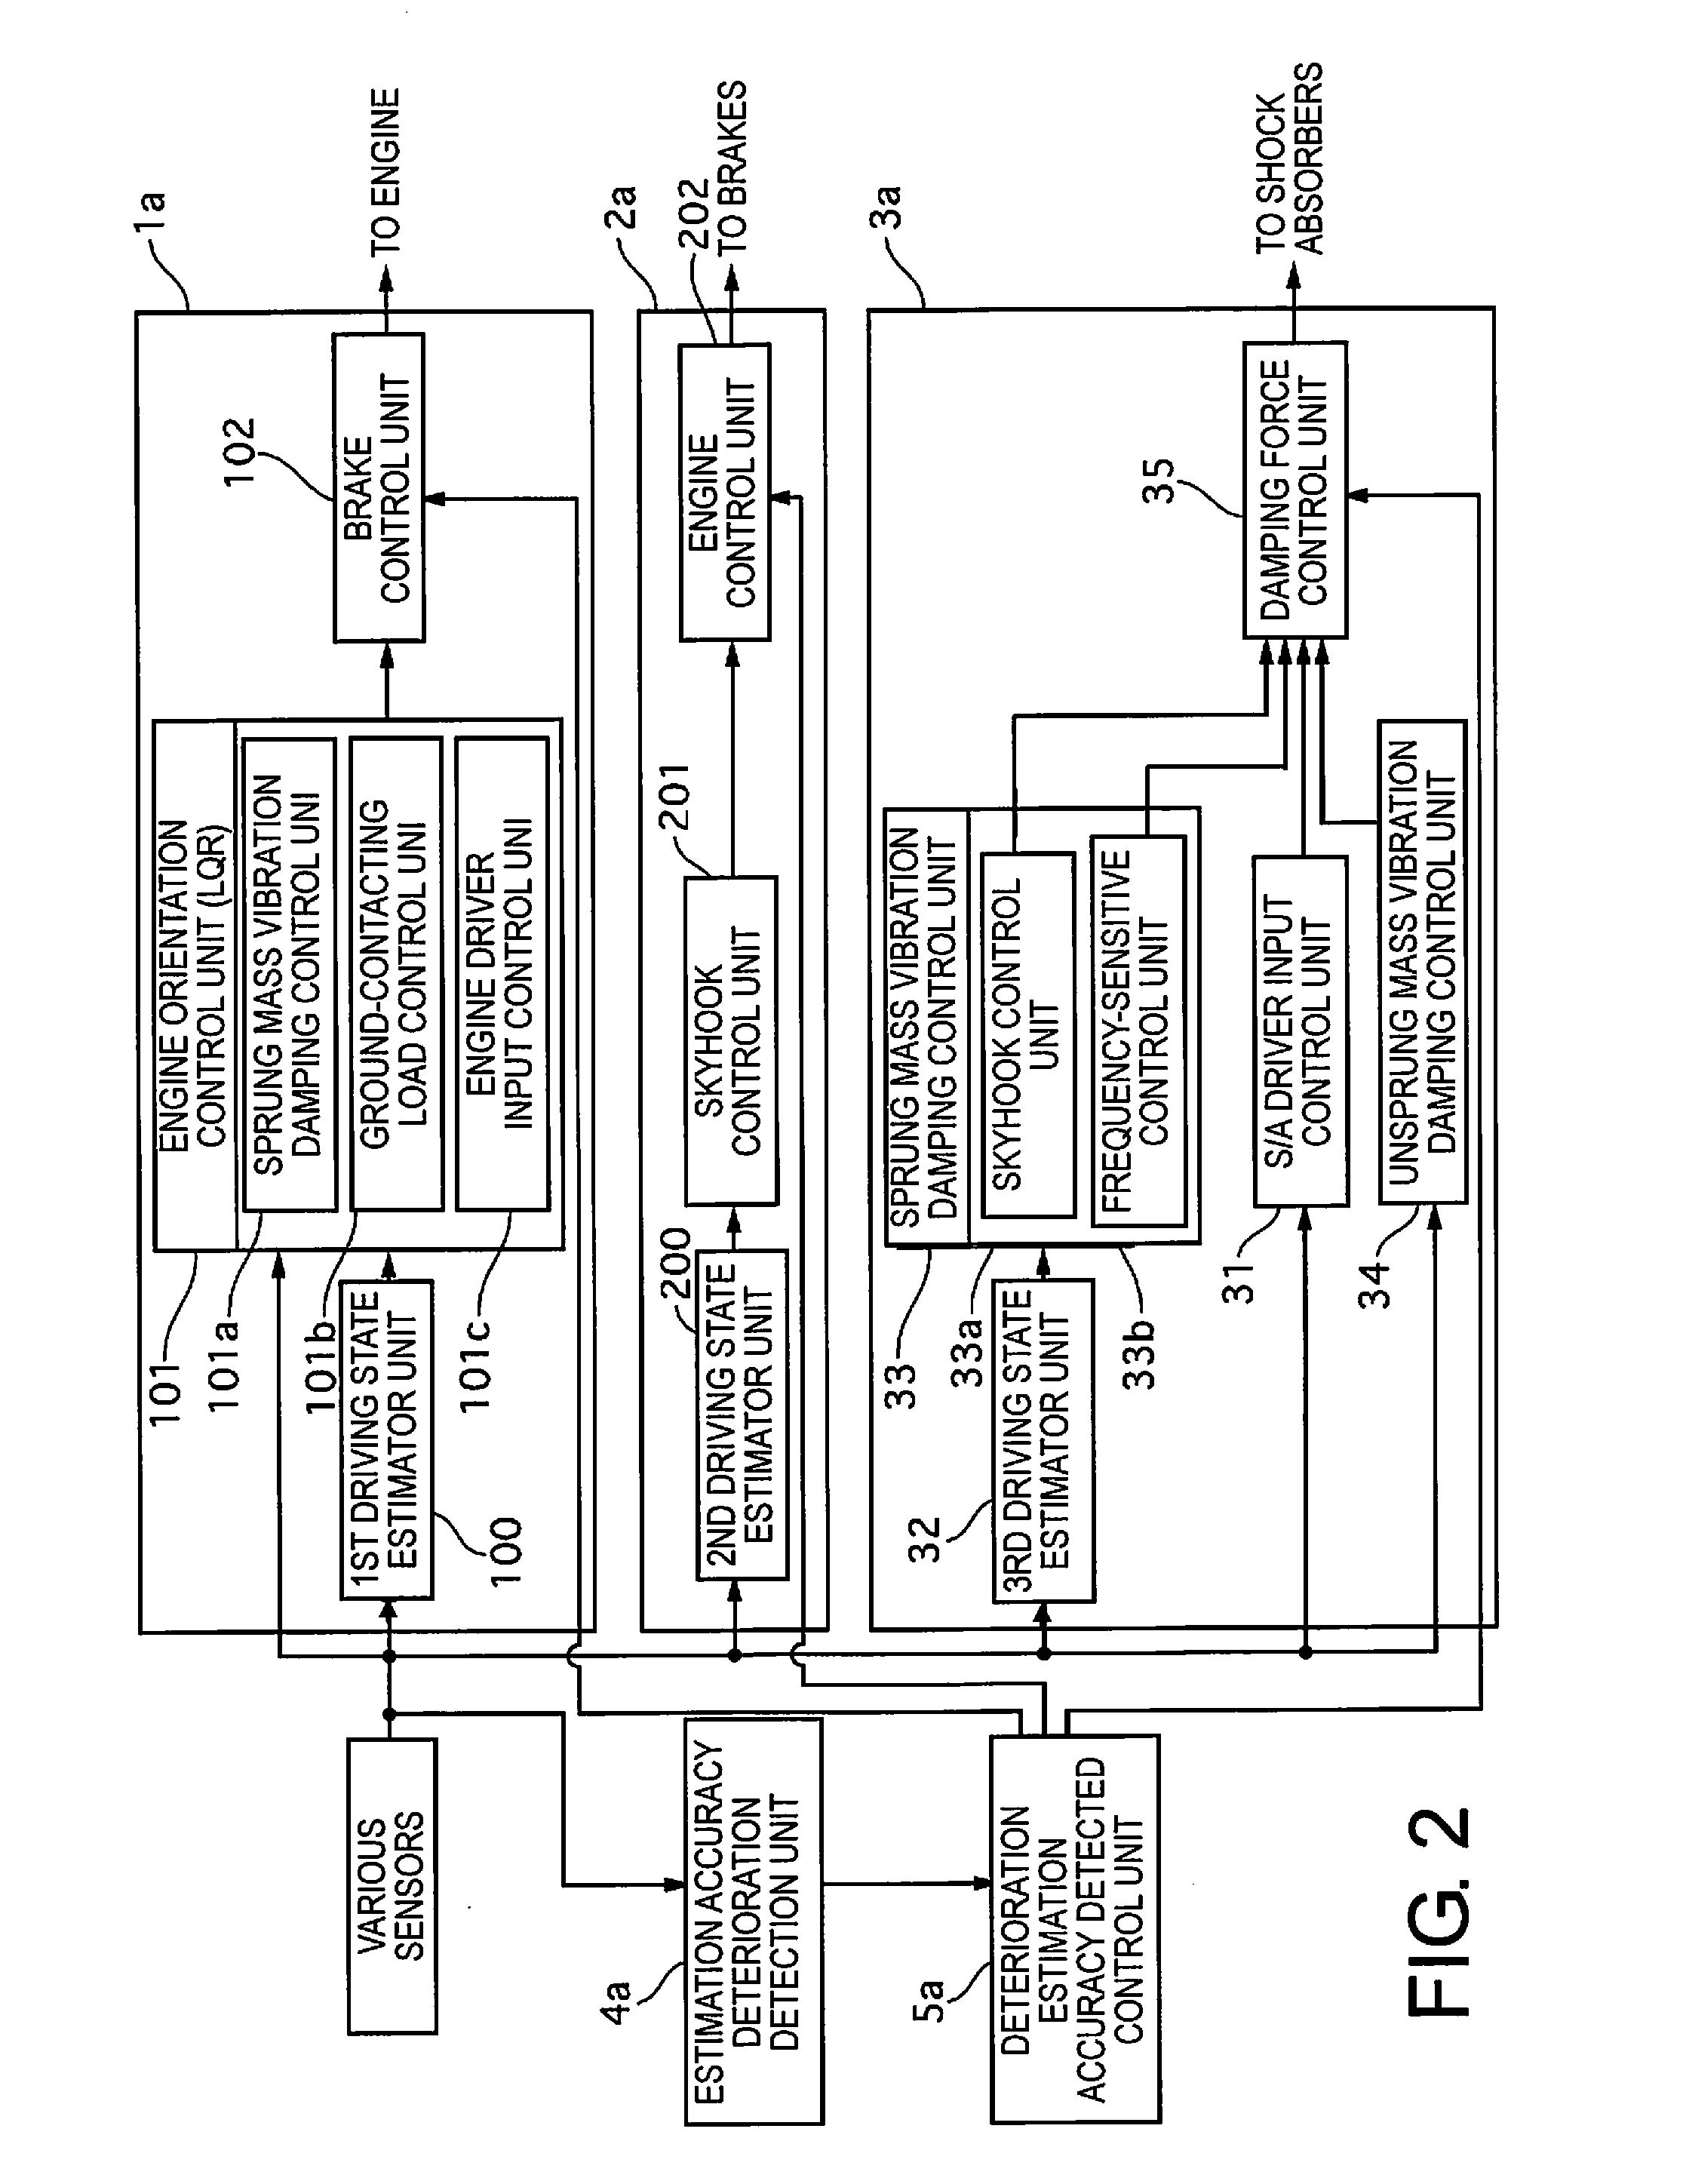 Vehicle control device, and vehicle control method